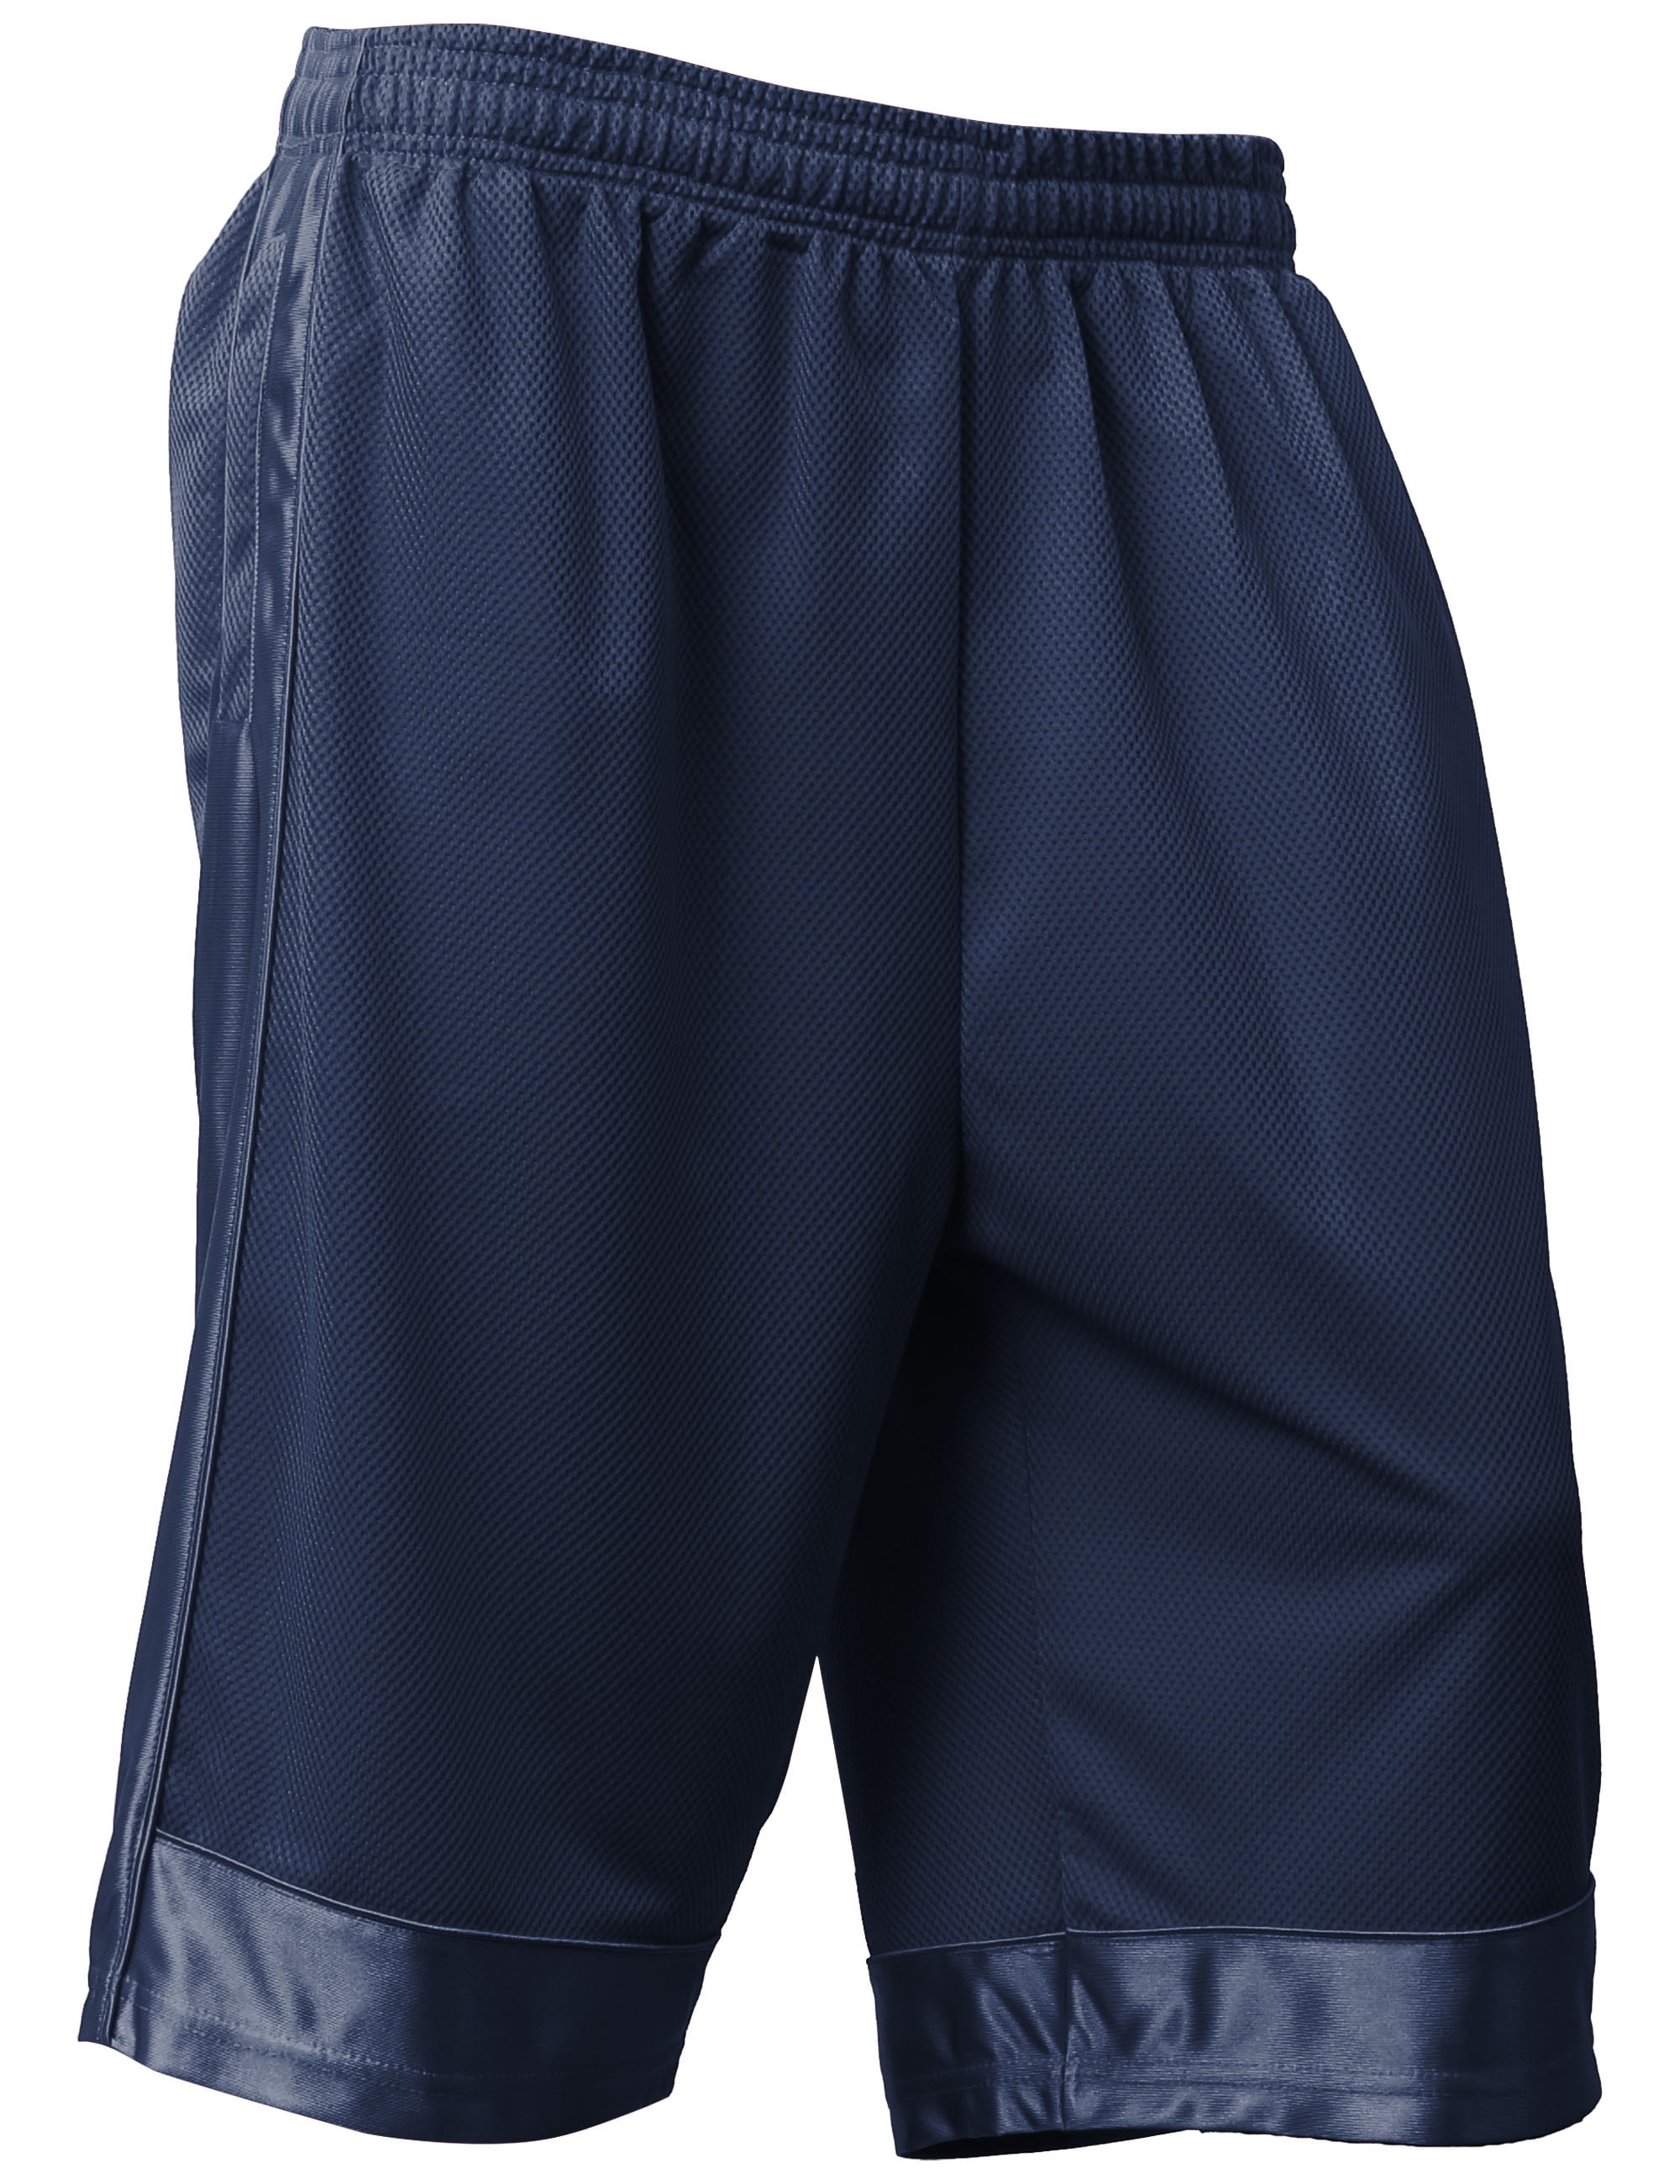 Ma Croix Mens Premium Basketball Mesh Shorts Heavyweight with Secure Zipper Back Pocket Big and Tall S-5XL